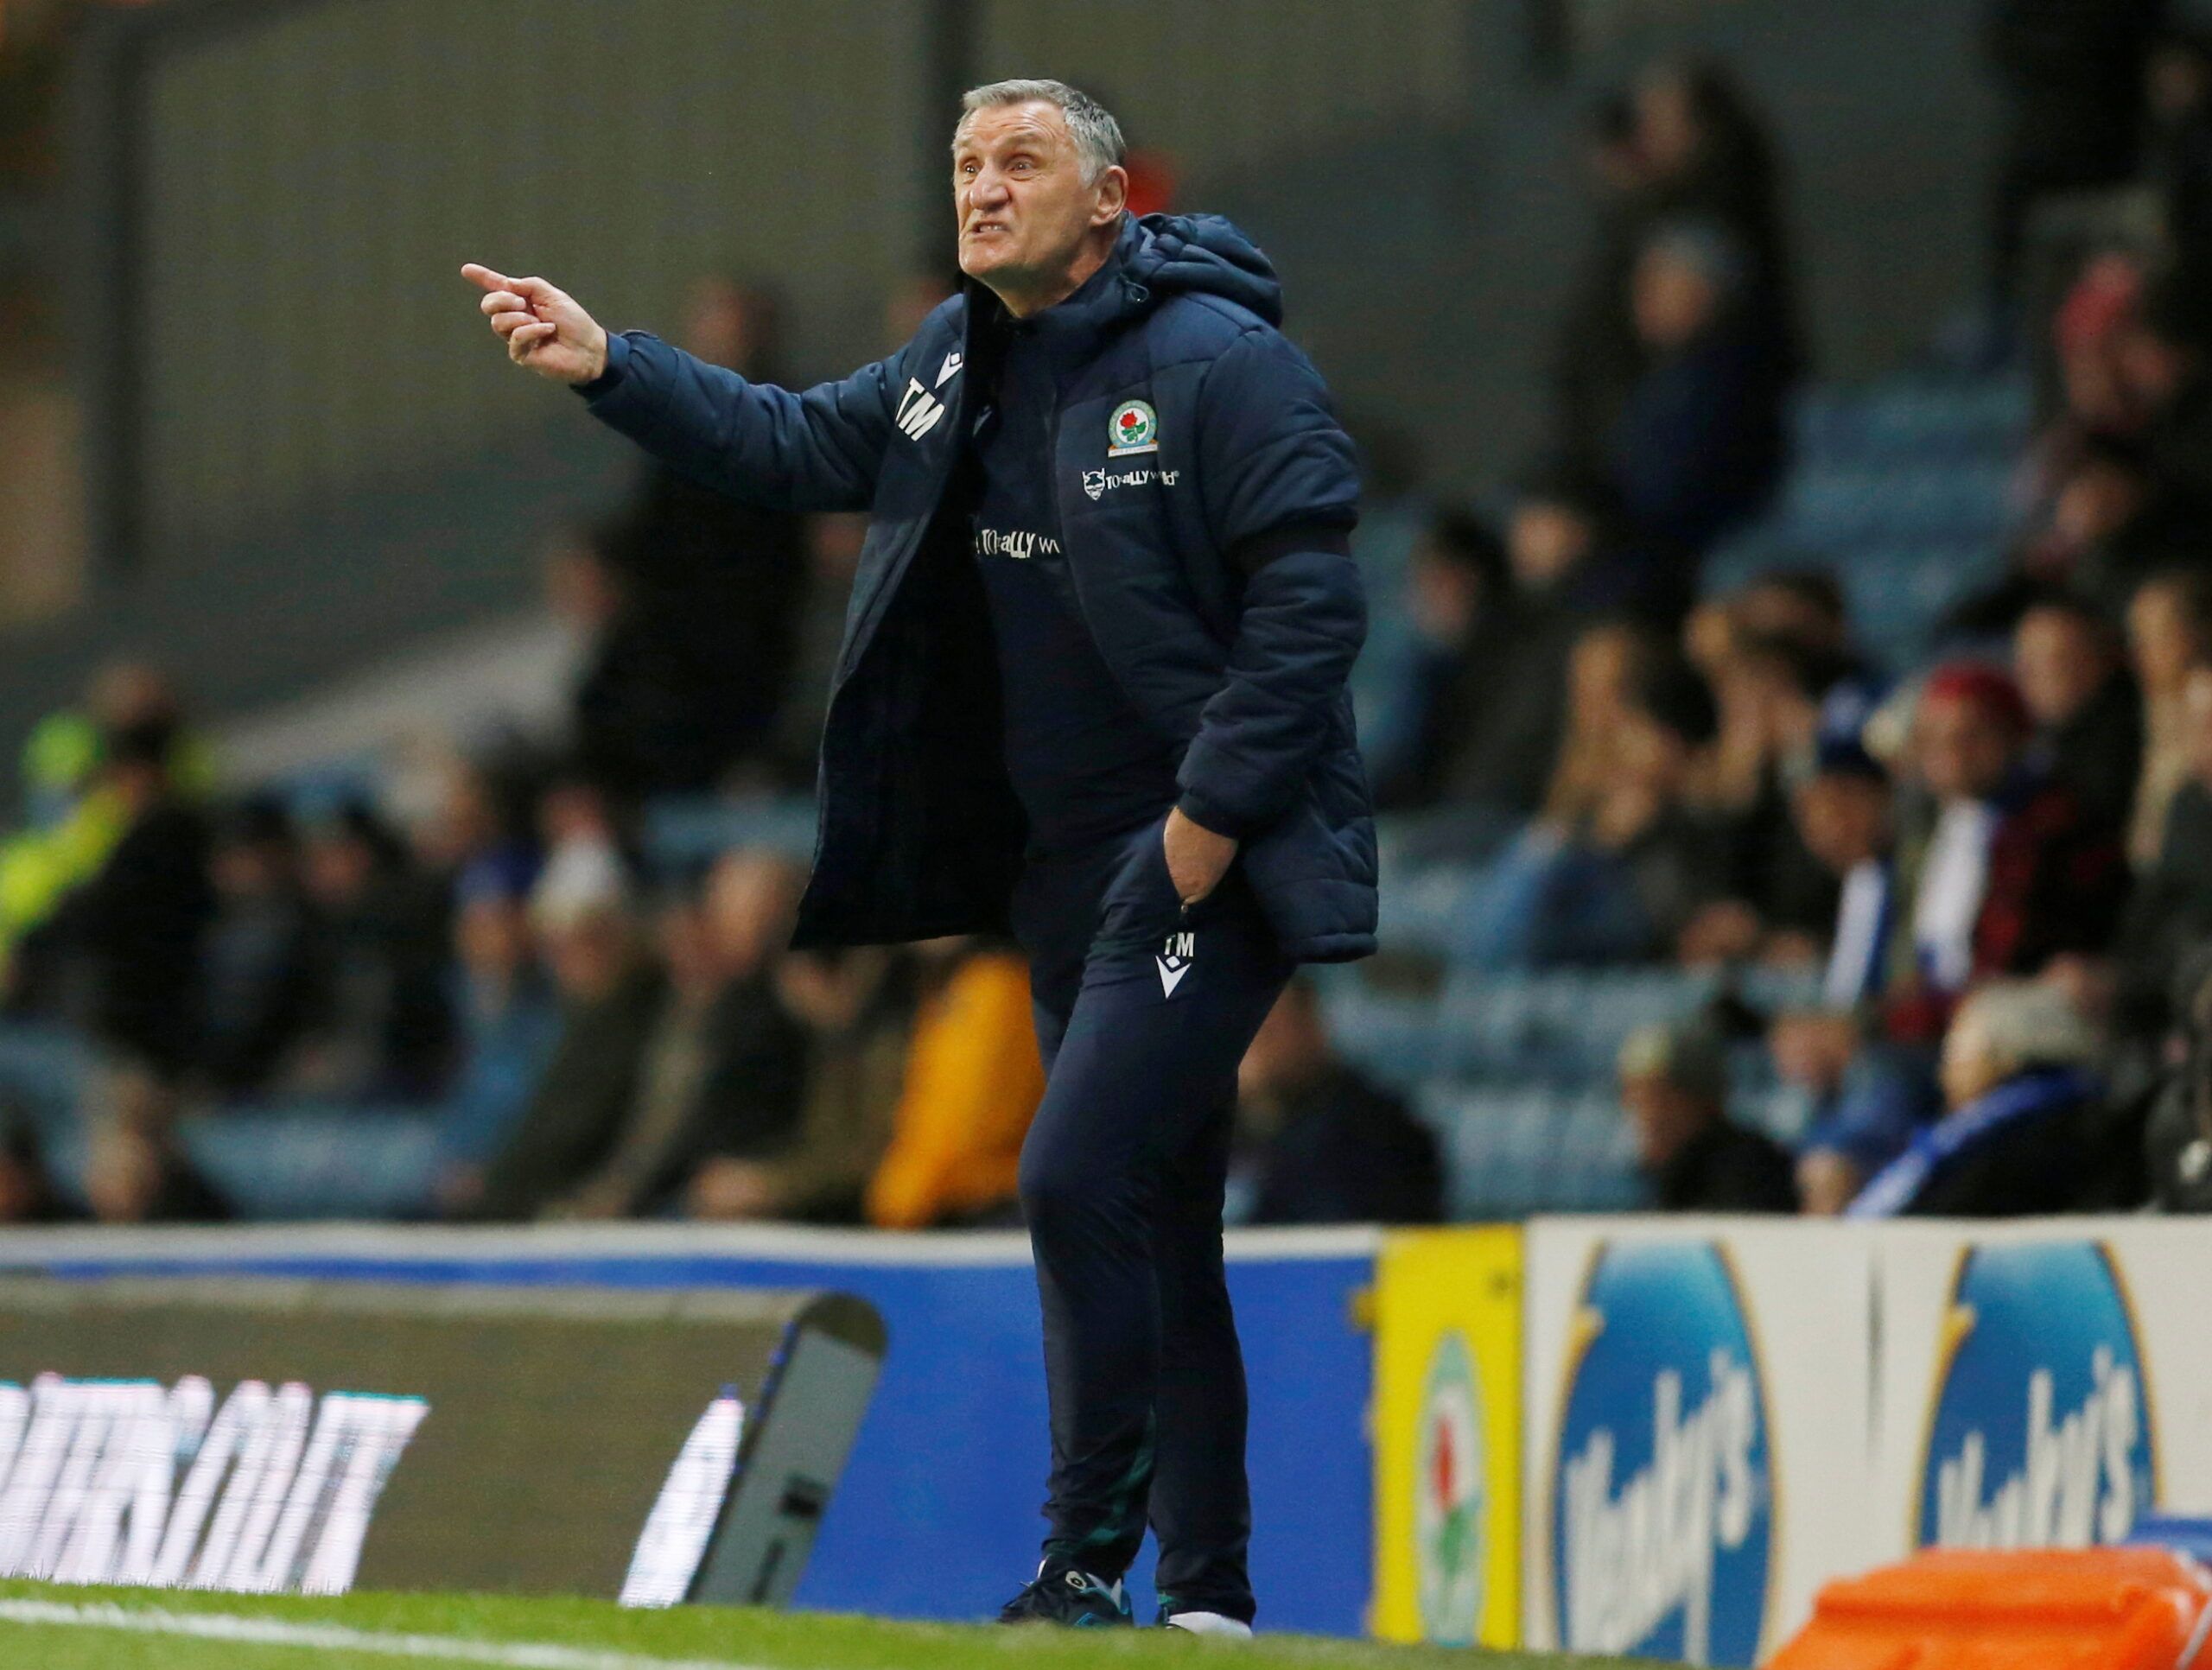 Soccer Football - Championship - Blackburn Rovers v Millwall - Ewood Park, Blackburn, Britain - March 8, 2022  Blackburn Rovers manager Tony Mowbray  Action Images/Ed Sykes  EDITORIAL USE ONLY. No use with unauthorized audio, video, data, fixture lists, club/league logos or 